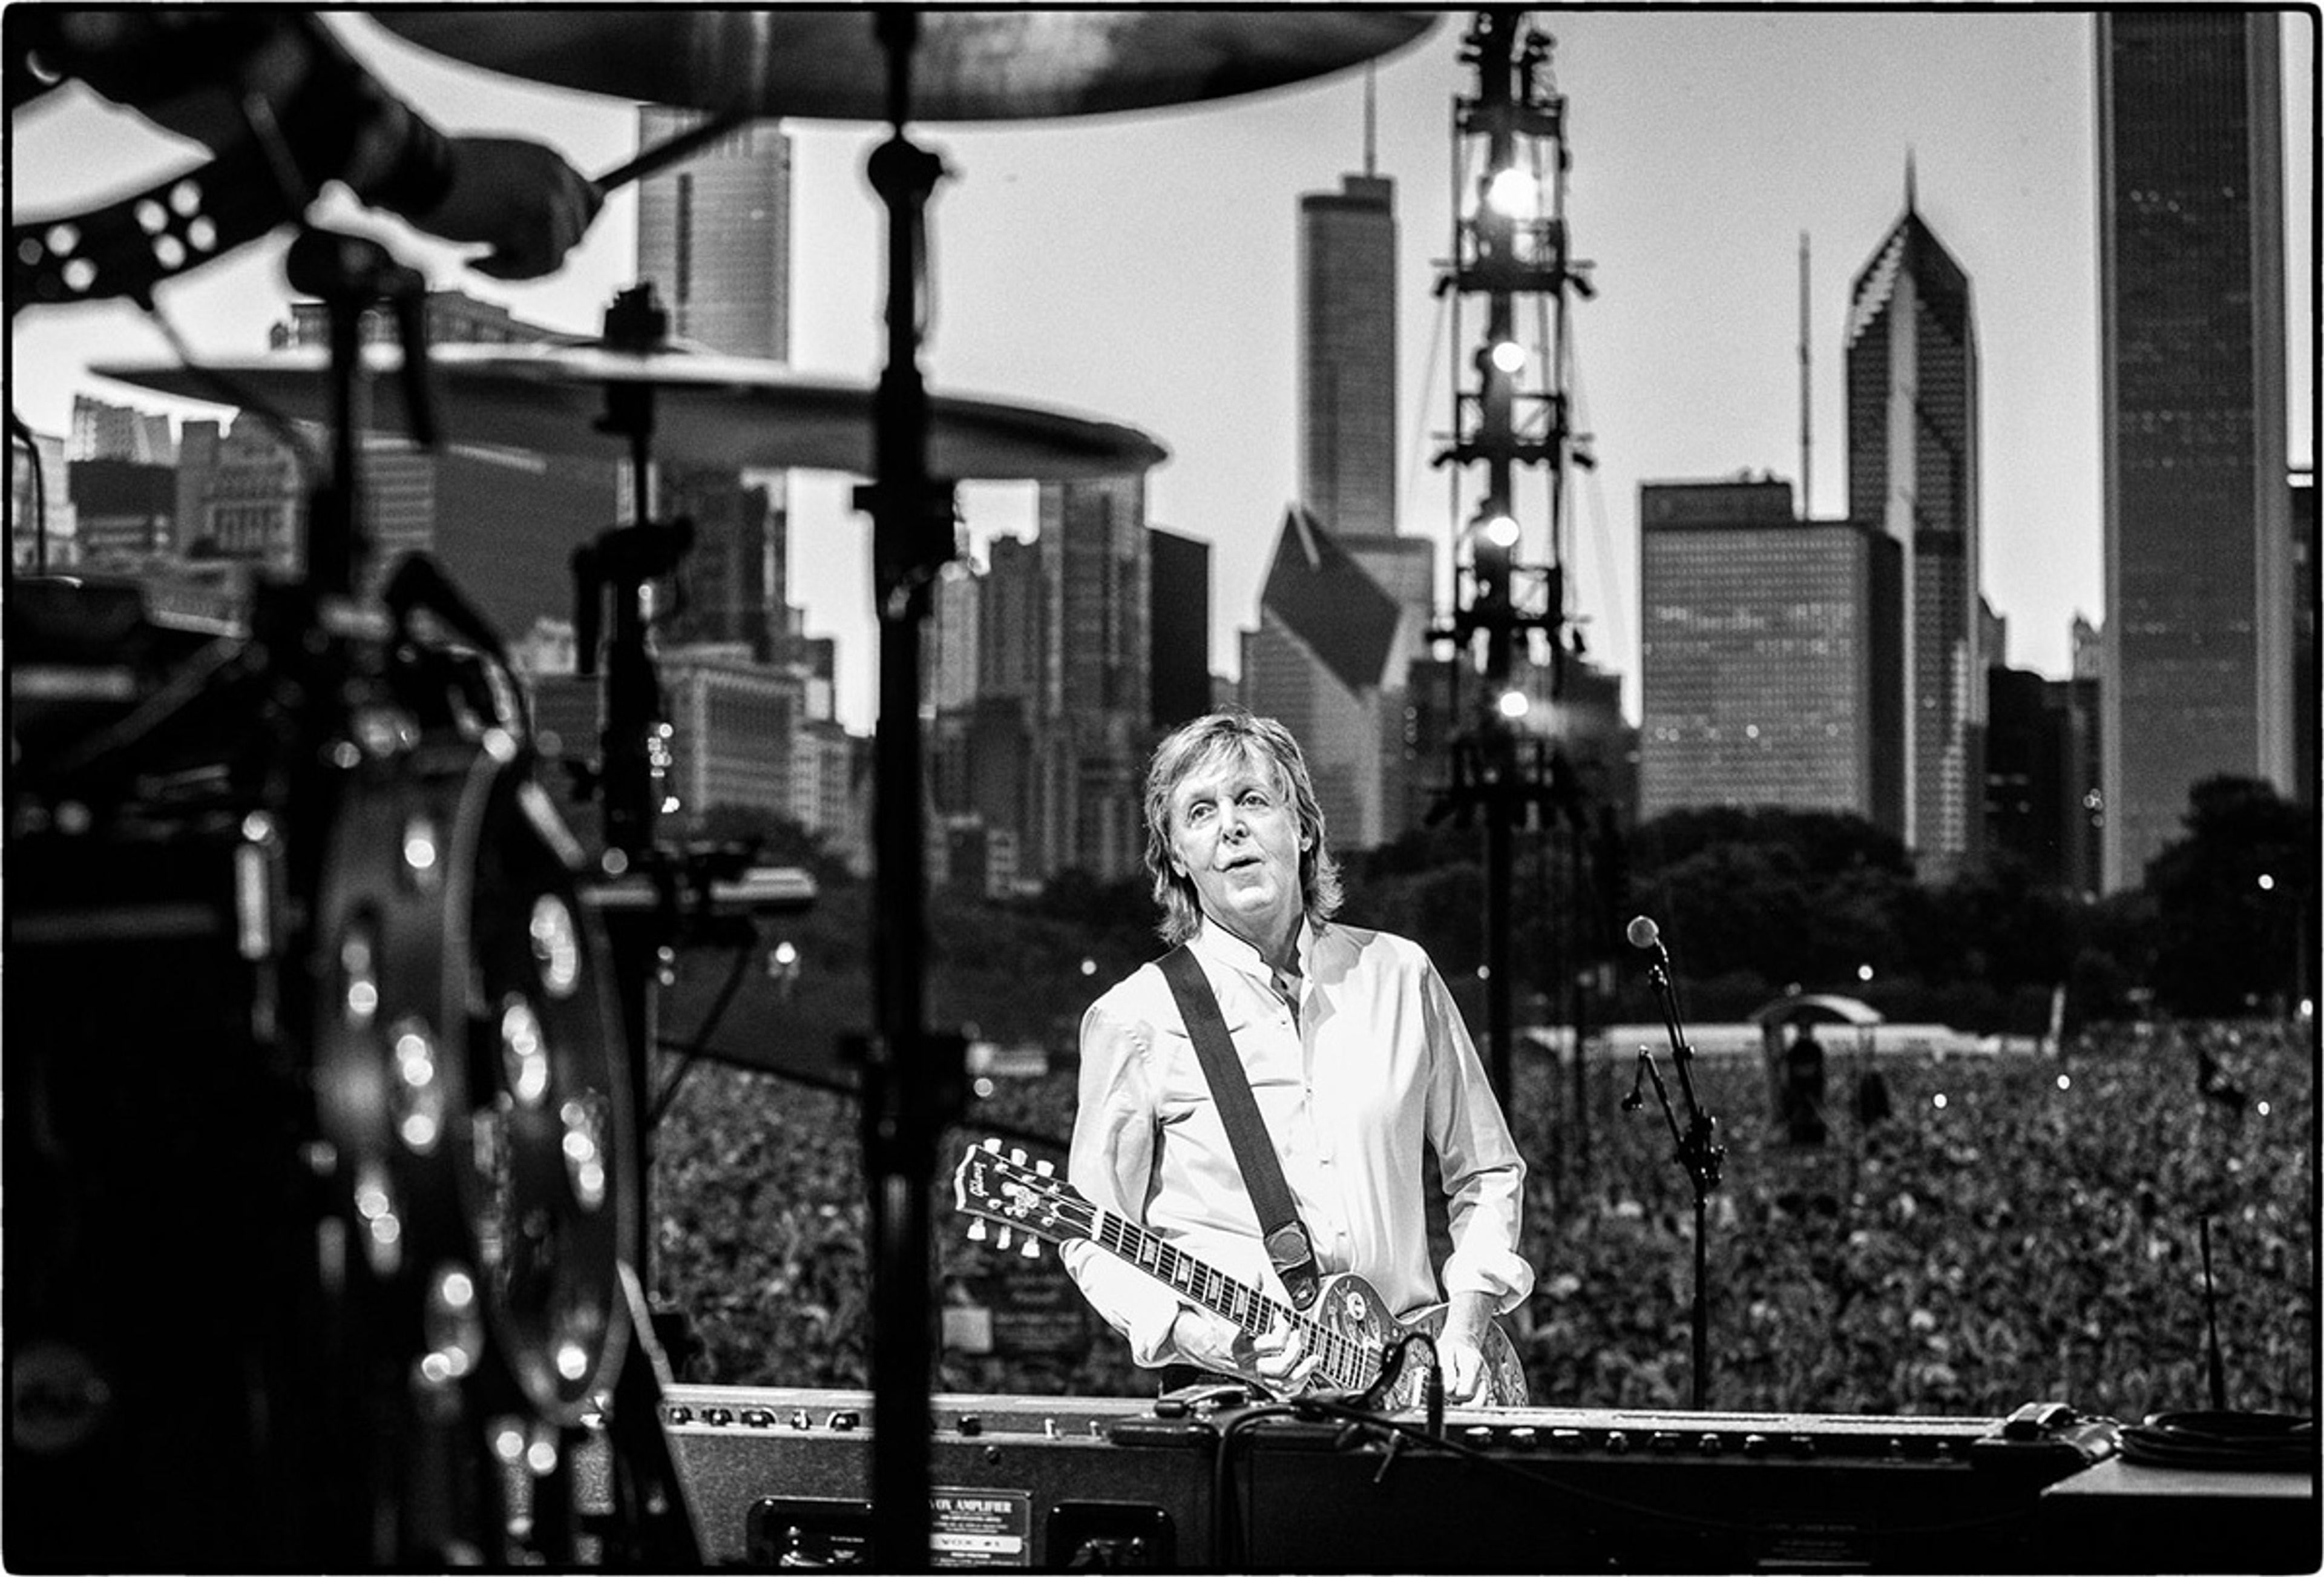 Paul performing at Lollapalooza Festival, Grant Park, Chicago - 31st July 2015